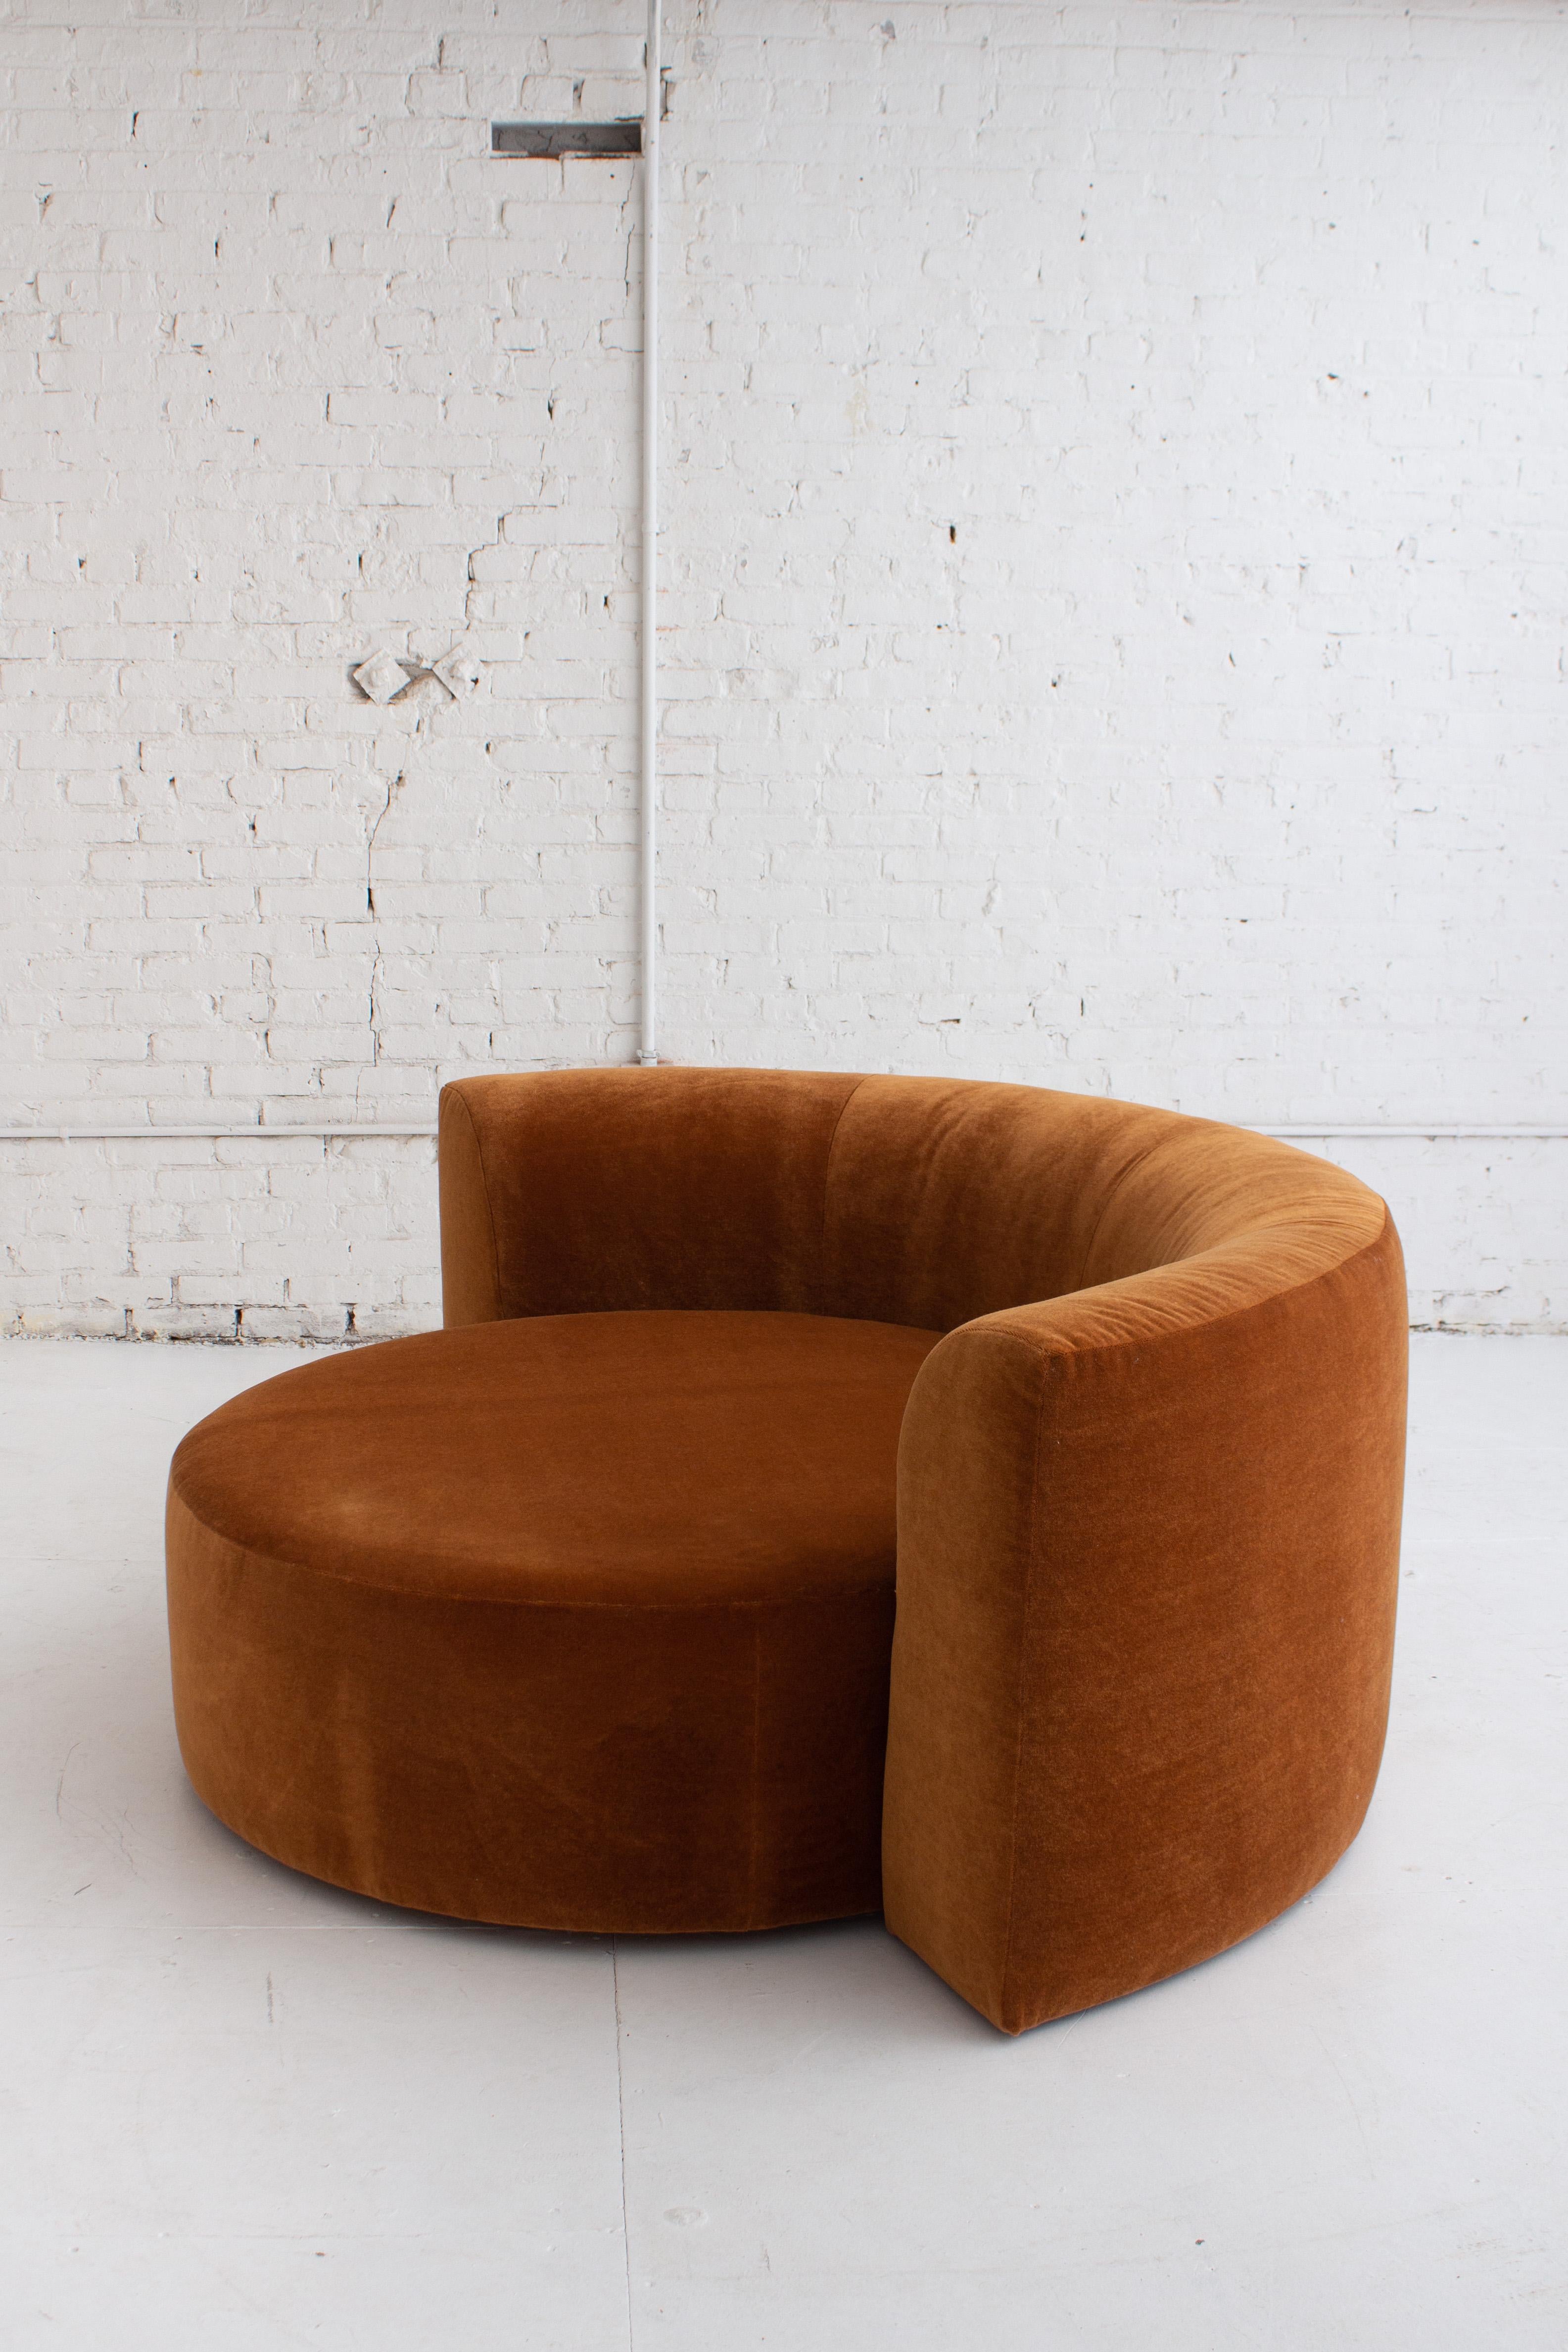 Circular Chaise Lounge in Mohair by Roger Rougier 5